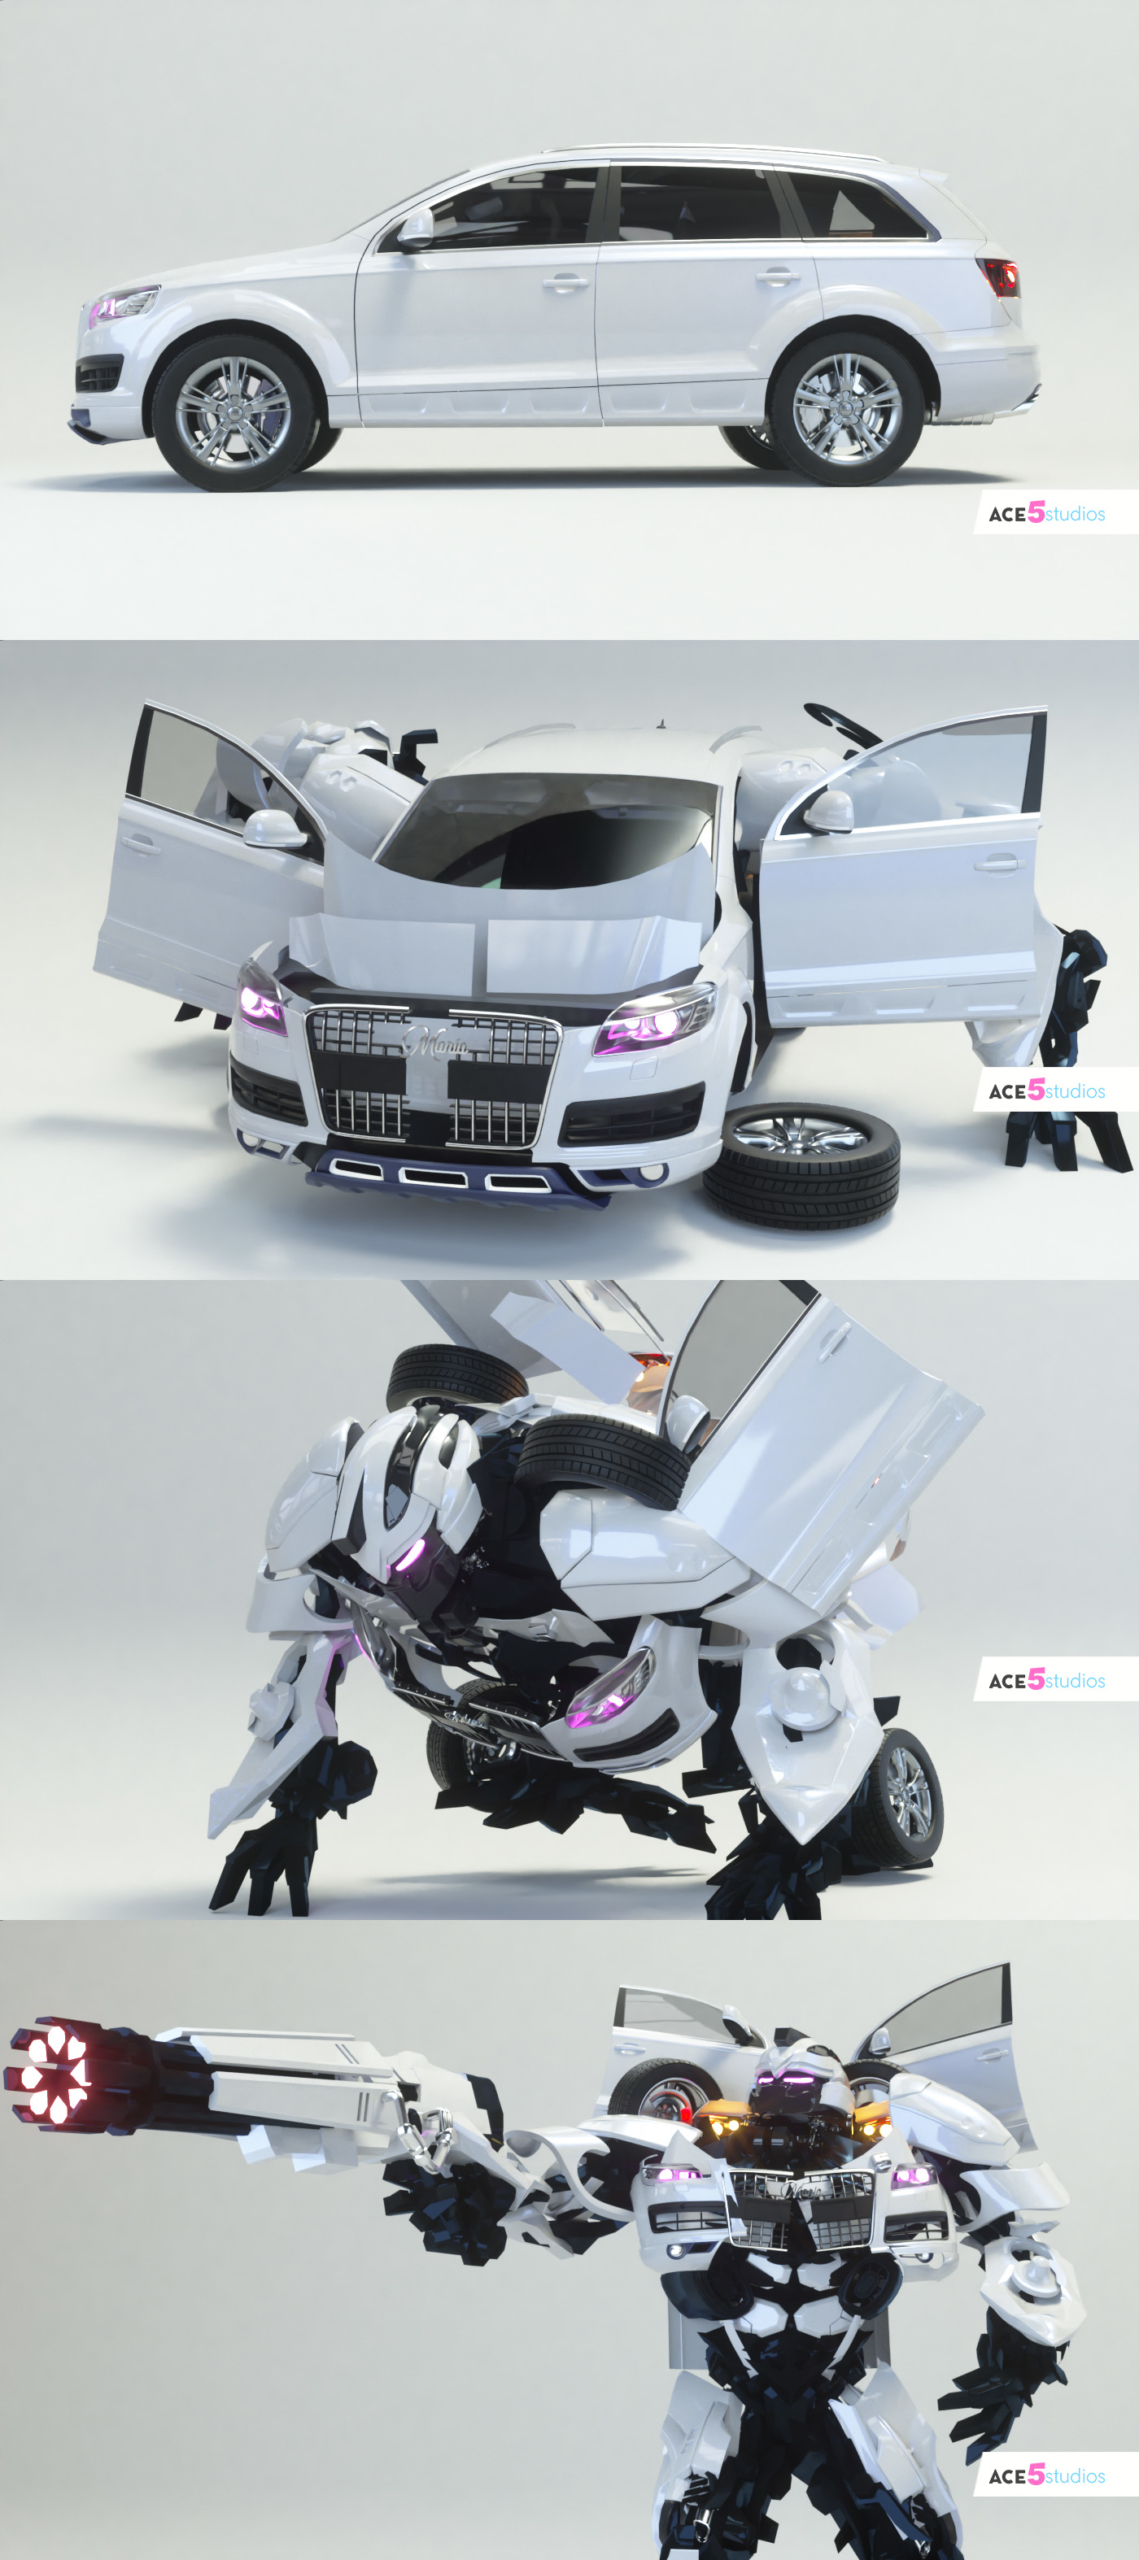 Transformer Cinema 4D rigged, animated. Controllers, Audi render from multiple angles